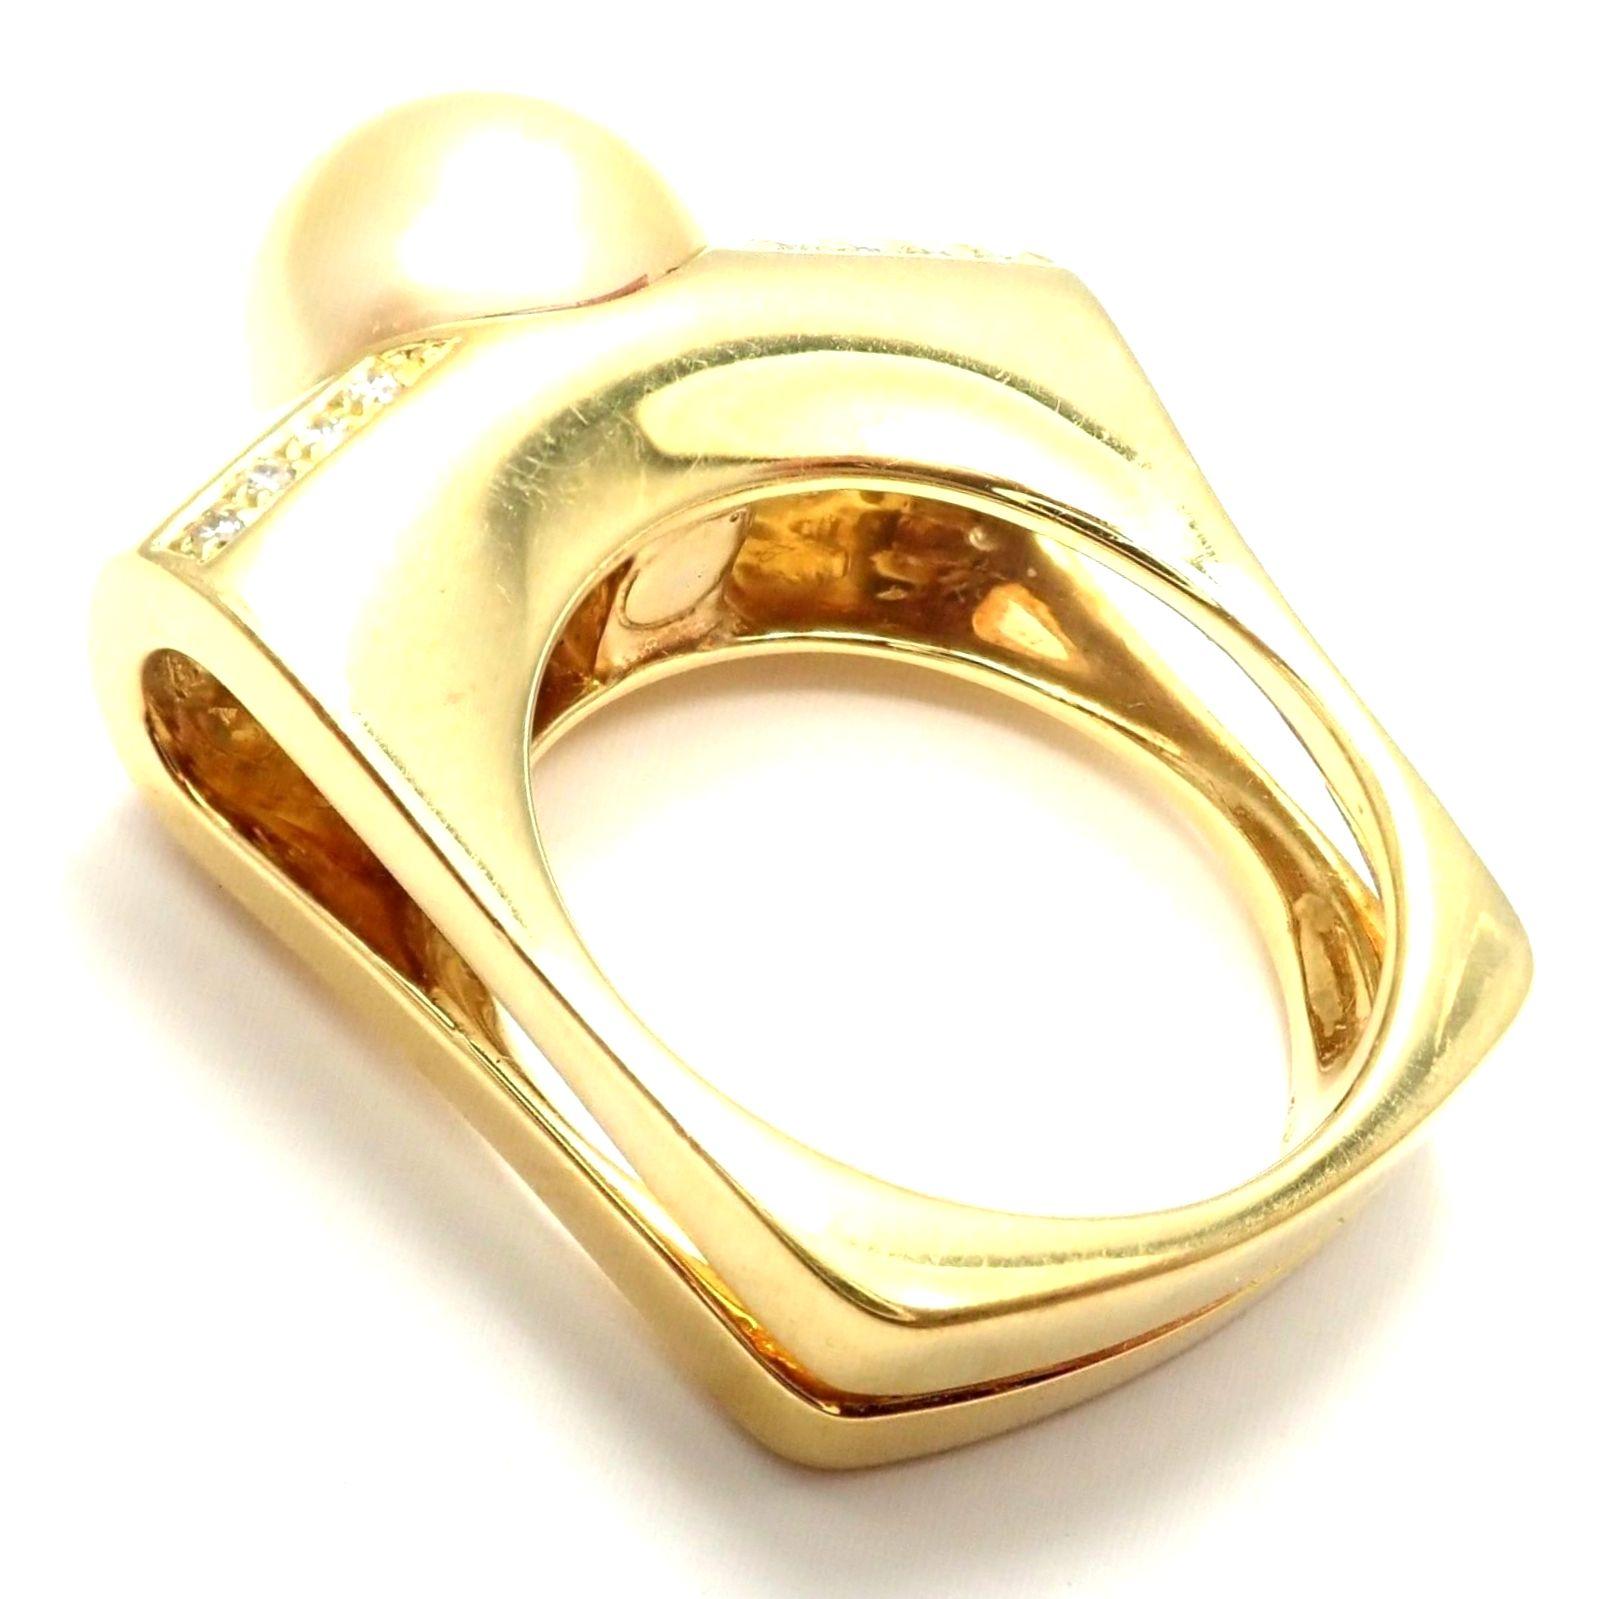 18k Yellow Gold Diamond South Sea Golden Pearl Ring by Kurt Wayne. 
With 28 Round Brilliant Cut Diamonds G color, VS1 clarity total weight approximately  0.30ct
1 Golden Yellow South Sea Pearl - 11mm
Details: 
Size: 7
Weight: 16.7g
Width: 